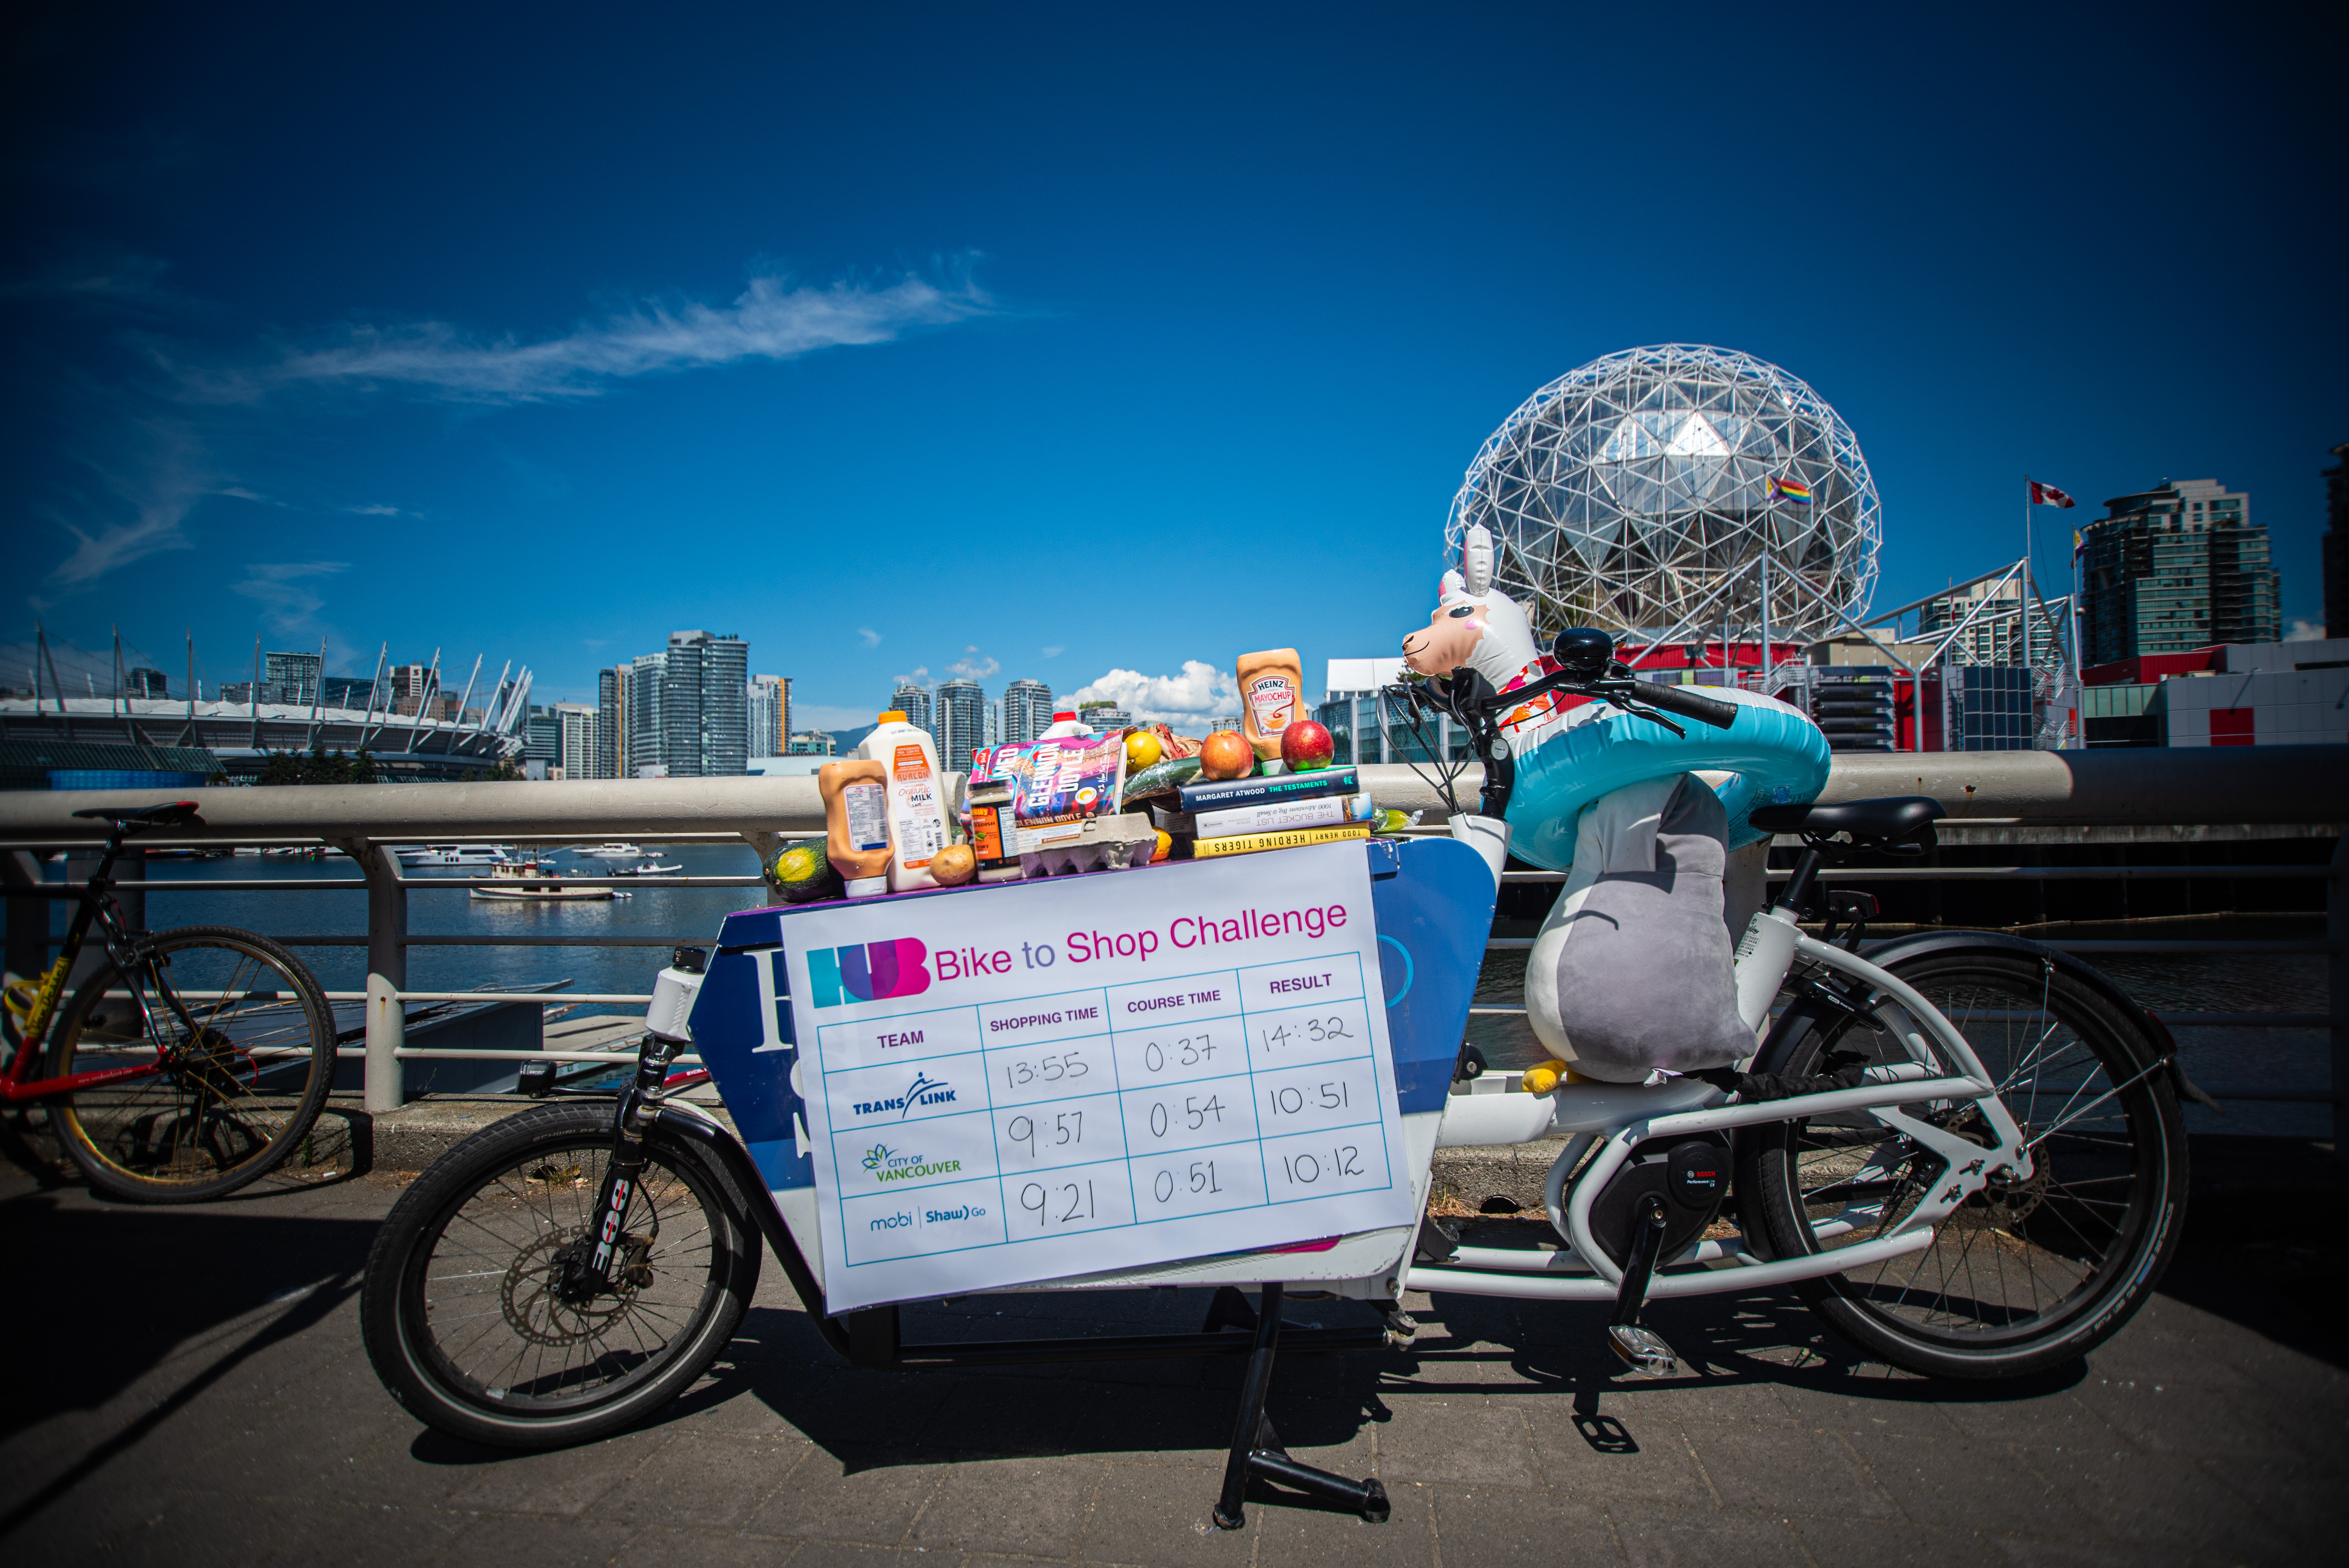 An image of the Bike to Shop Challenge scoreboard against HUB Cycling's e-cargo bike. Mobi by Shaw Go just sneaking in first place with a 10:12 finish time! The City of Vancouver took second place with a 10:51 finish time, followed by TransLink finishing at 14:32.